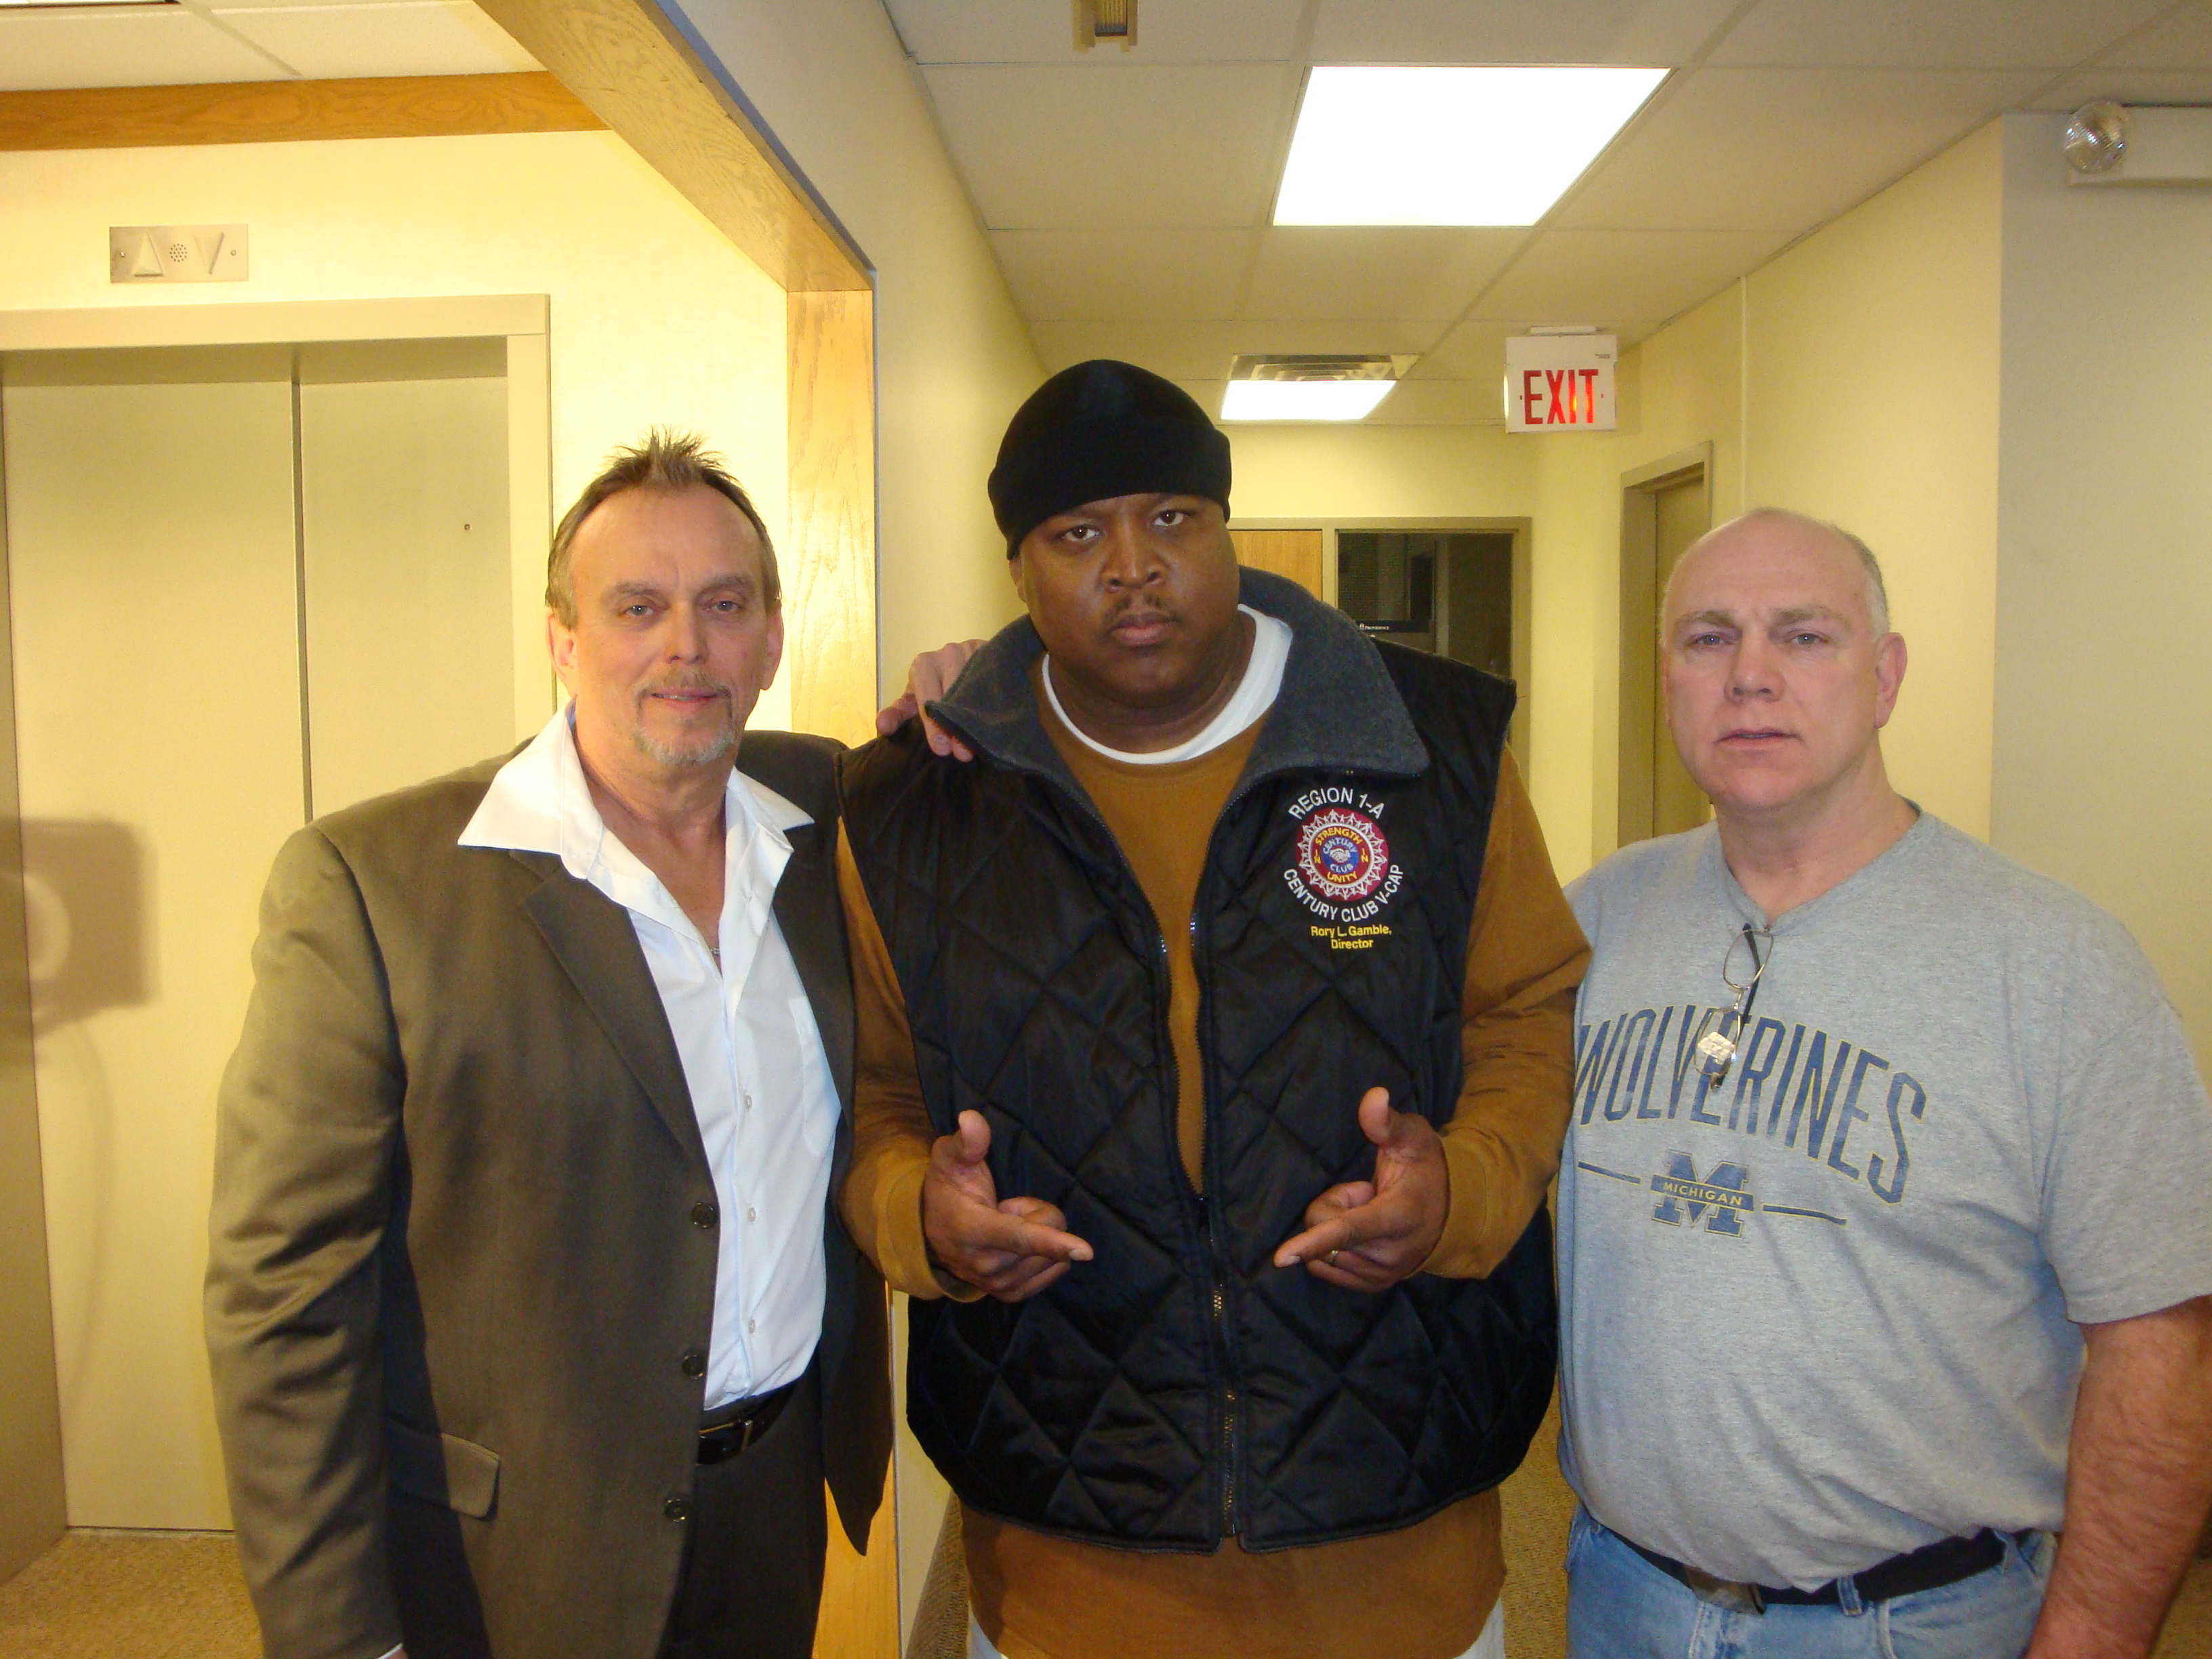 From left, actor-director Anthony Hornus (Renovation, Wild Michigan), Larry Simmons (Locked In a Room, A State of Hate) and David Papenfuss (An Ordinary Killer, Dean Teaster's Ghost Town) on the Detroit set of Locked In a Room.